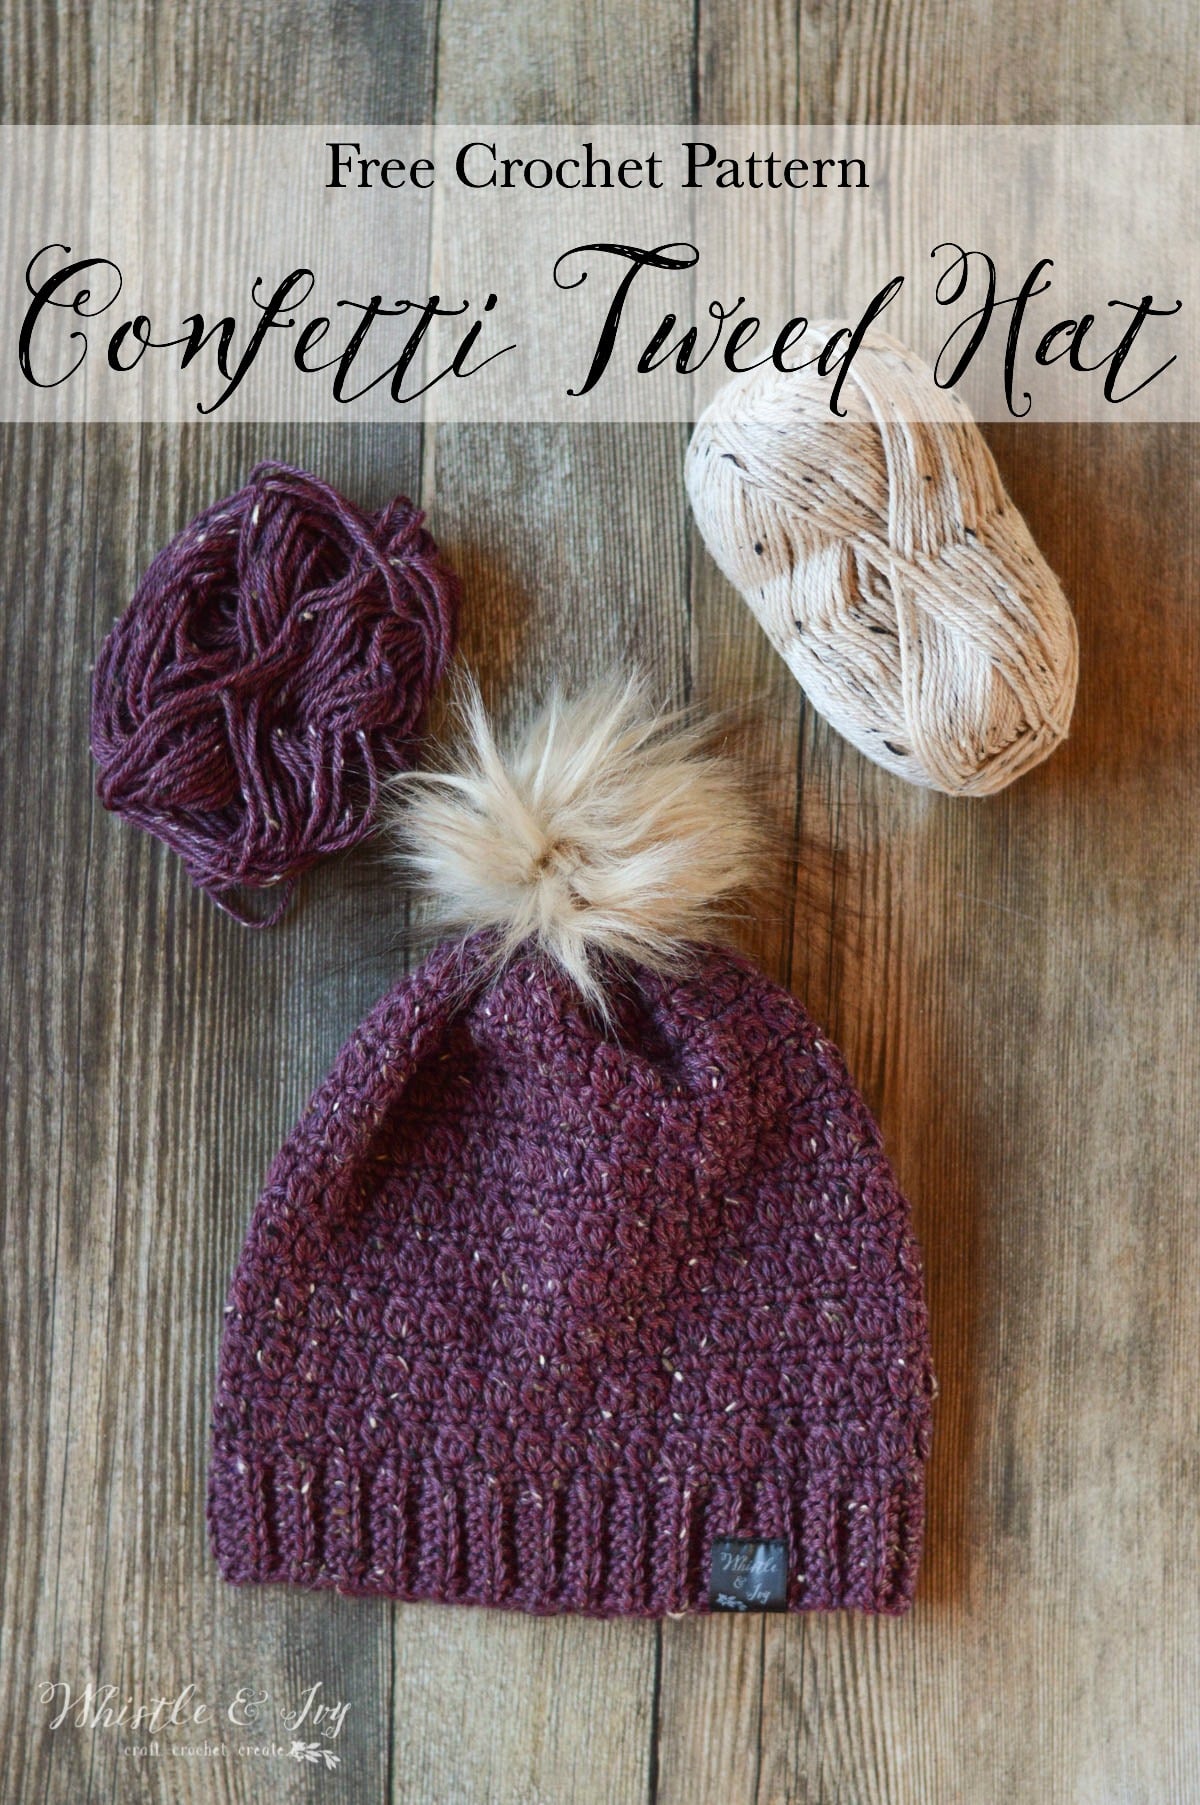 FREE Crochet Pattern: Crochet Confetti Tweed Slouchy - This pretty tweed slouchy hat is stylish all winter long, and the earthy flecks are a nod to confetti and NYE!